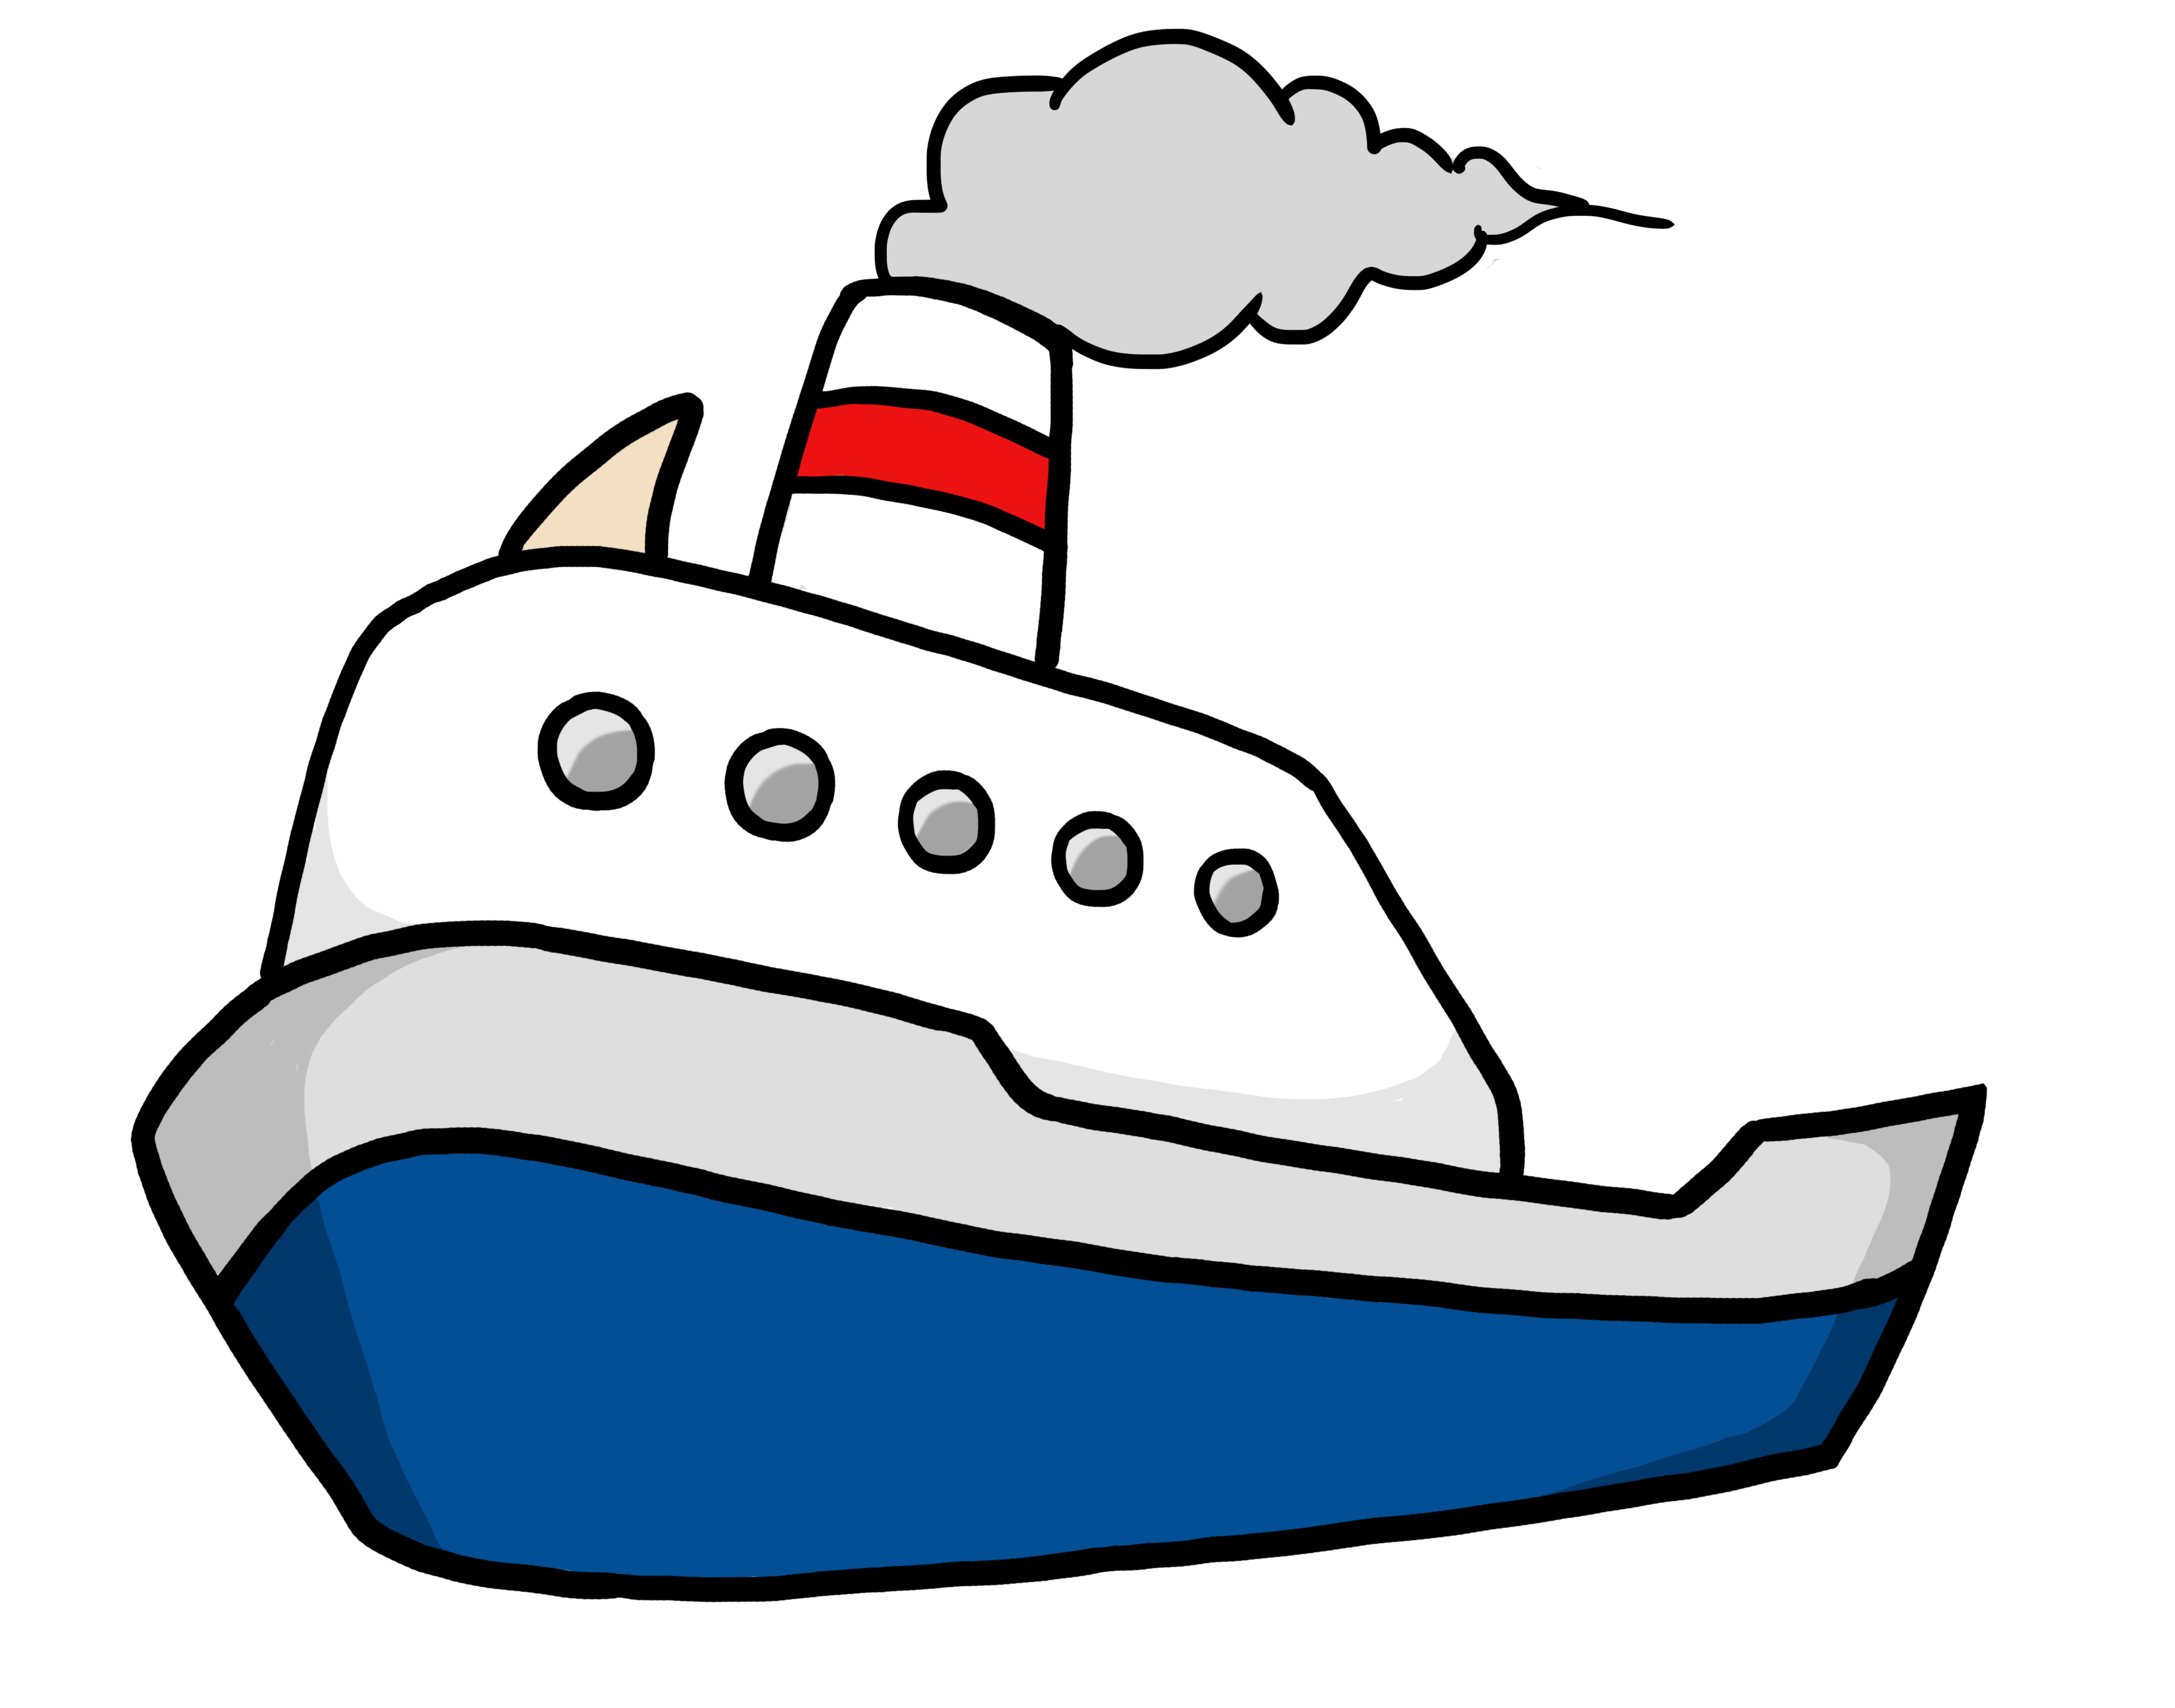 Sailboat clipart hostted